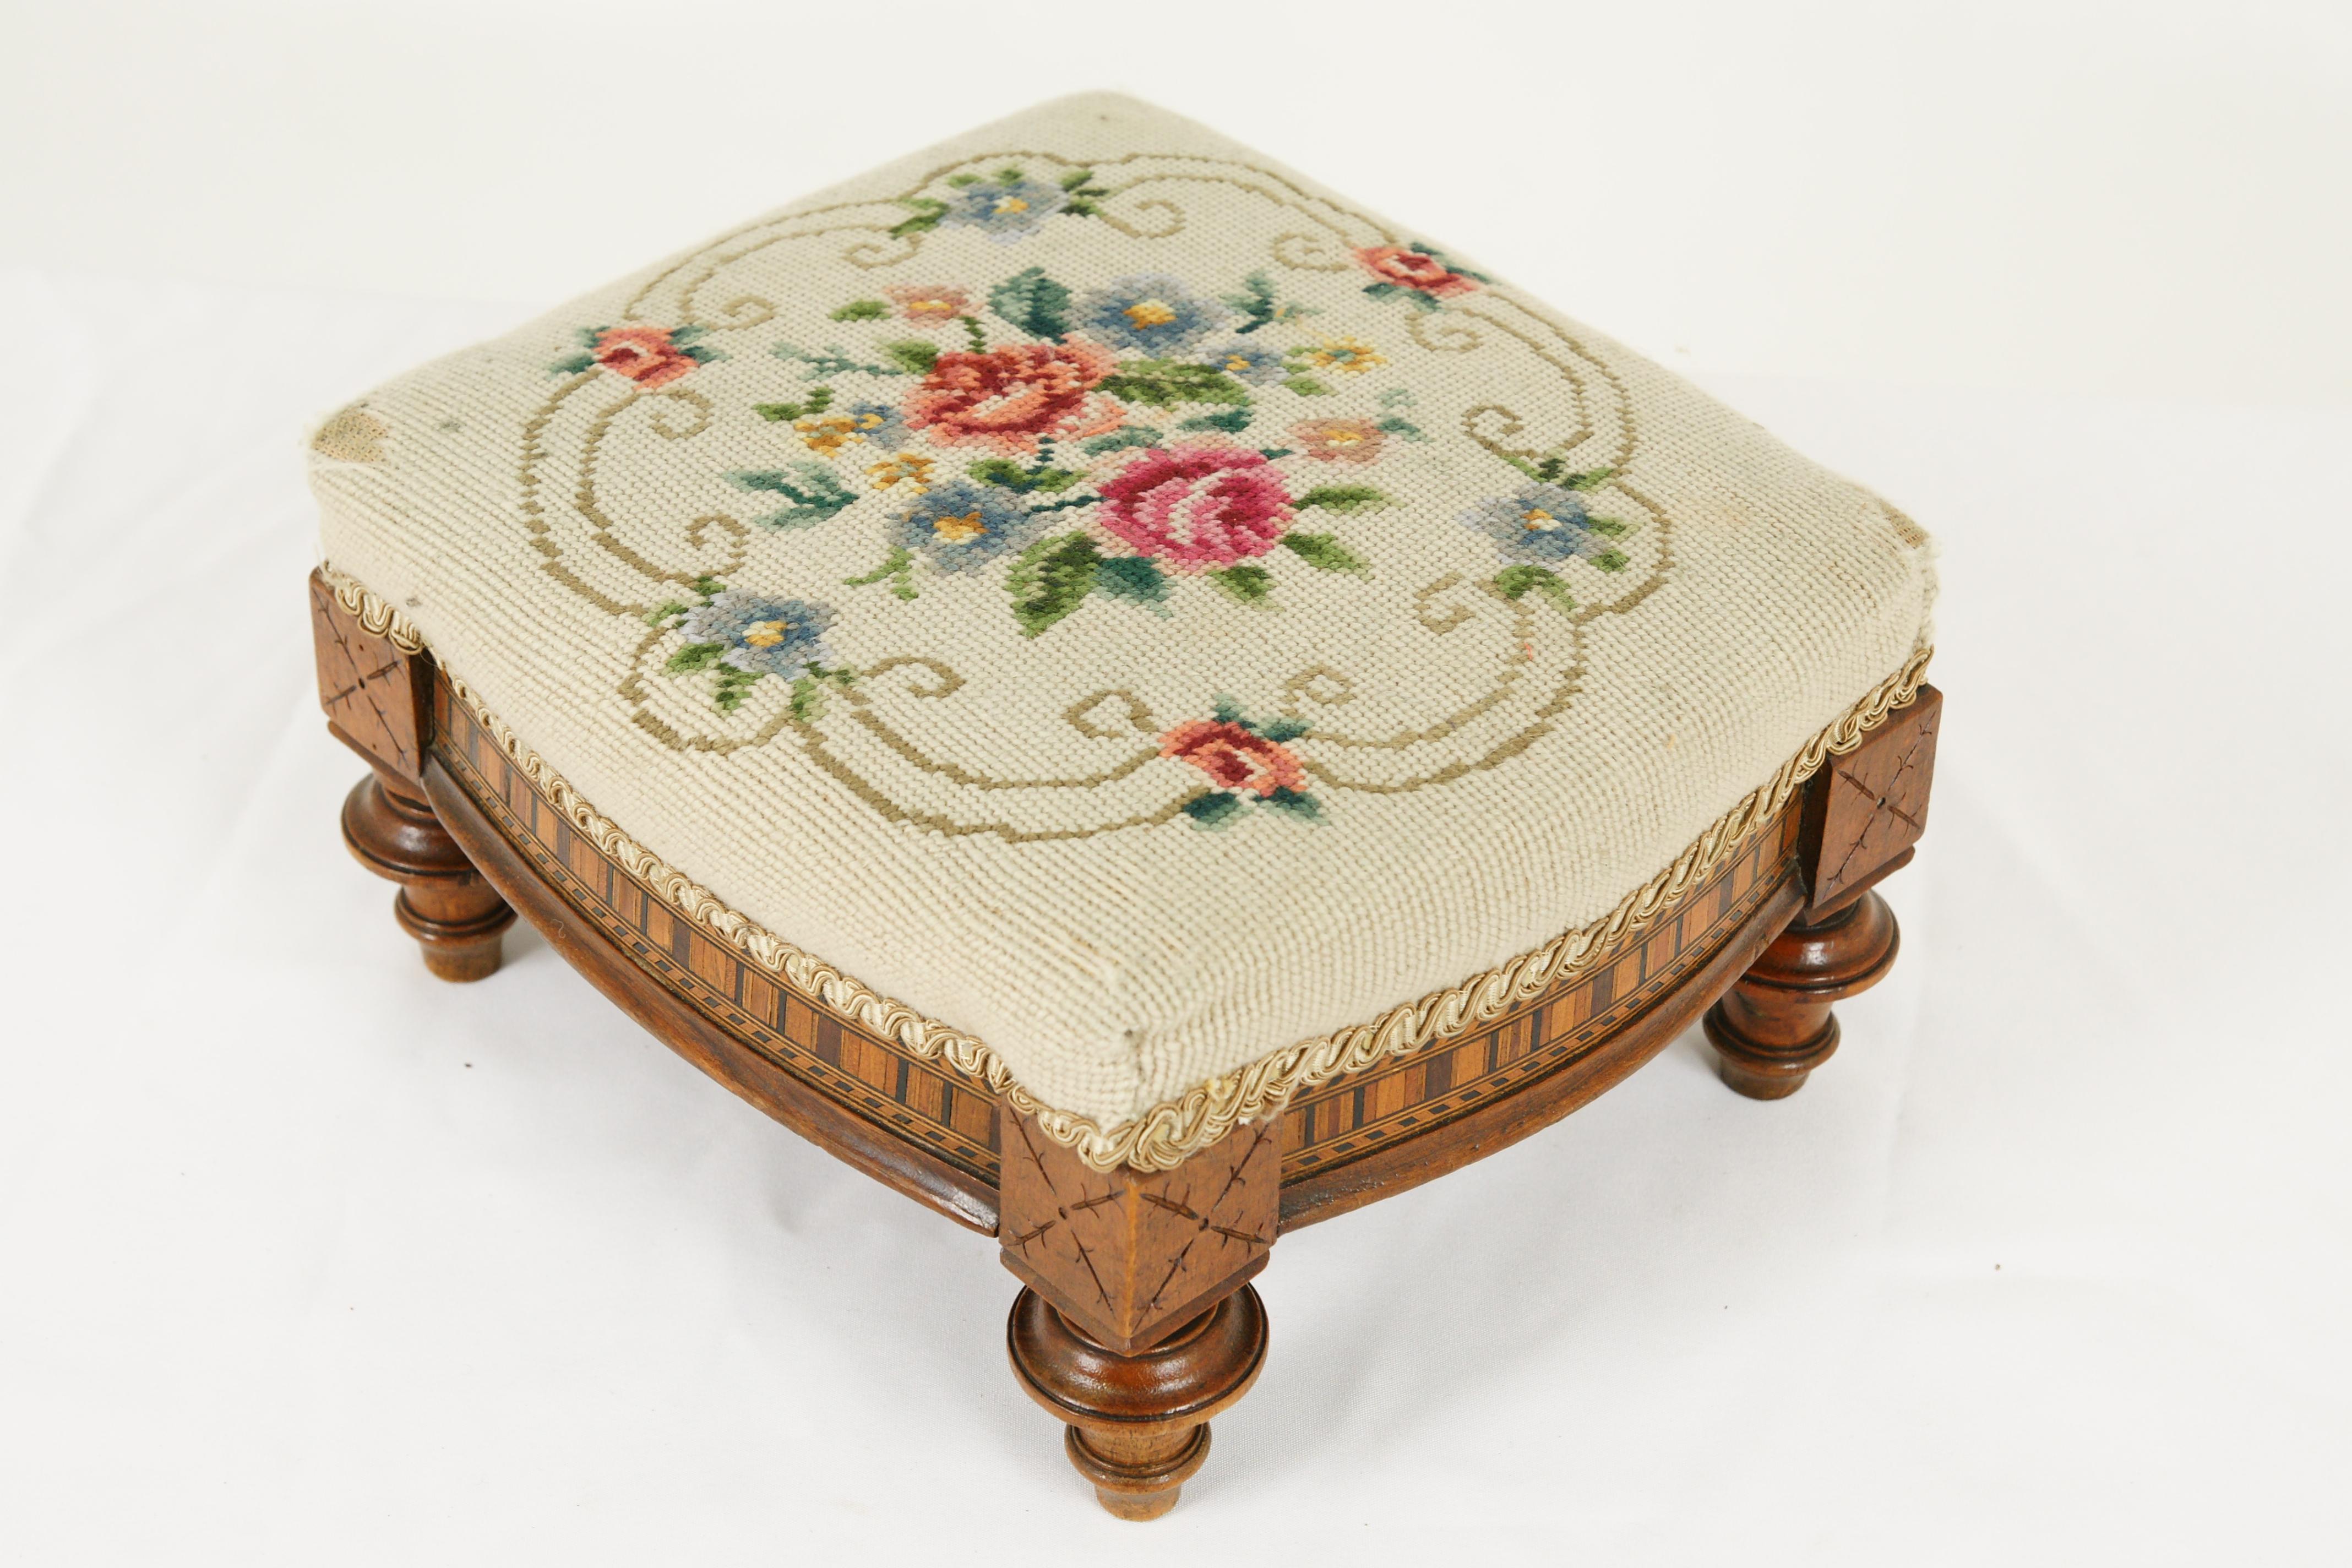 Antique embroidered footstool, low foot stool, needlepoint footstool, Victorian, inlaid, Scotland 1880, B1733

Scotland 1880
Solid walnut with satinwood veneer
Original finish
Shaped top with needlepoint, features a foliate theme
Inlaid frame